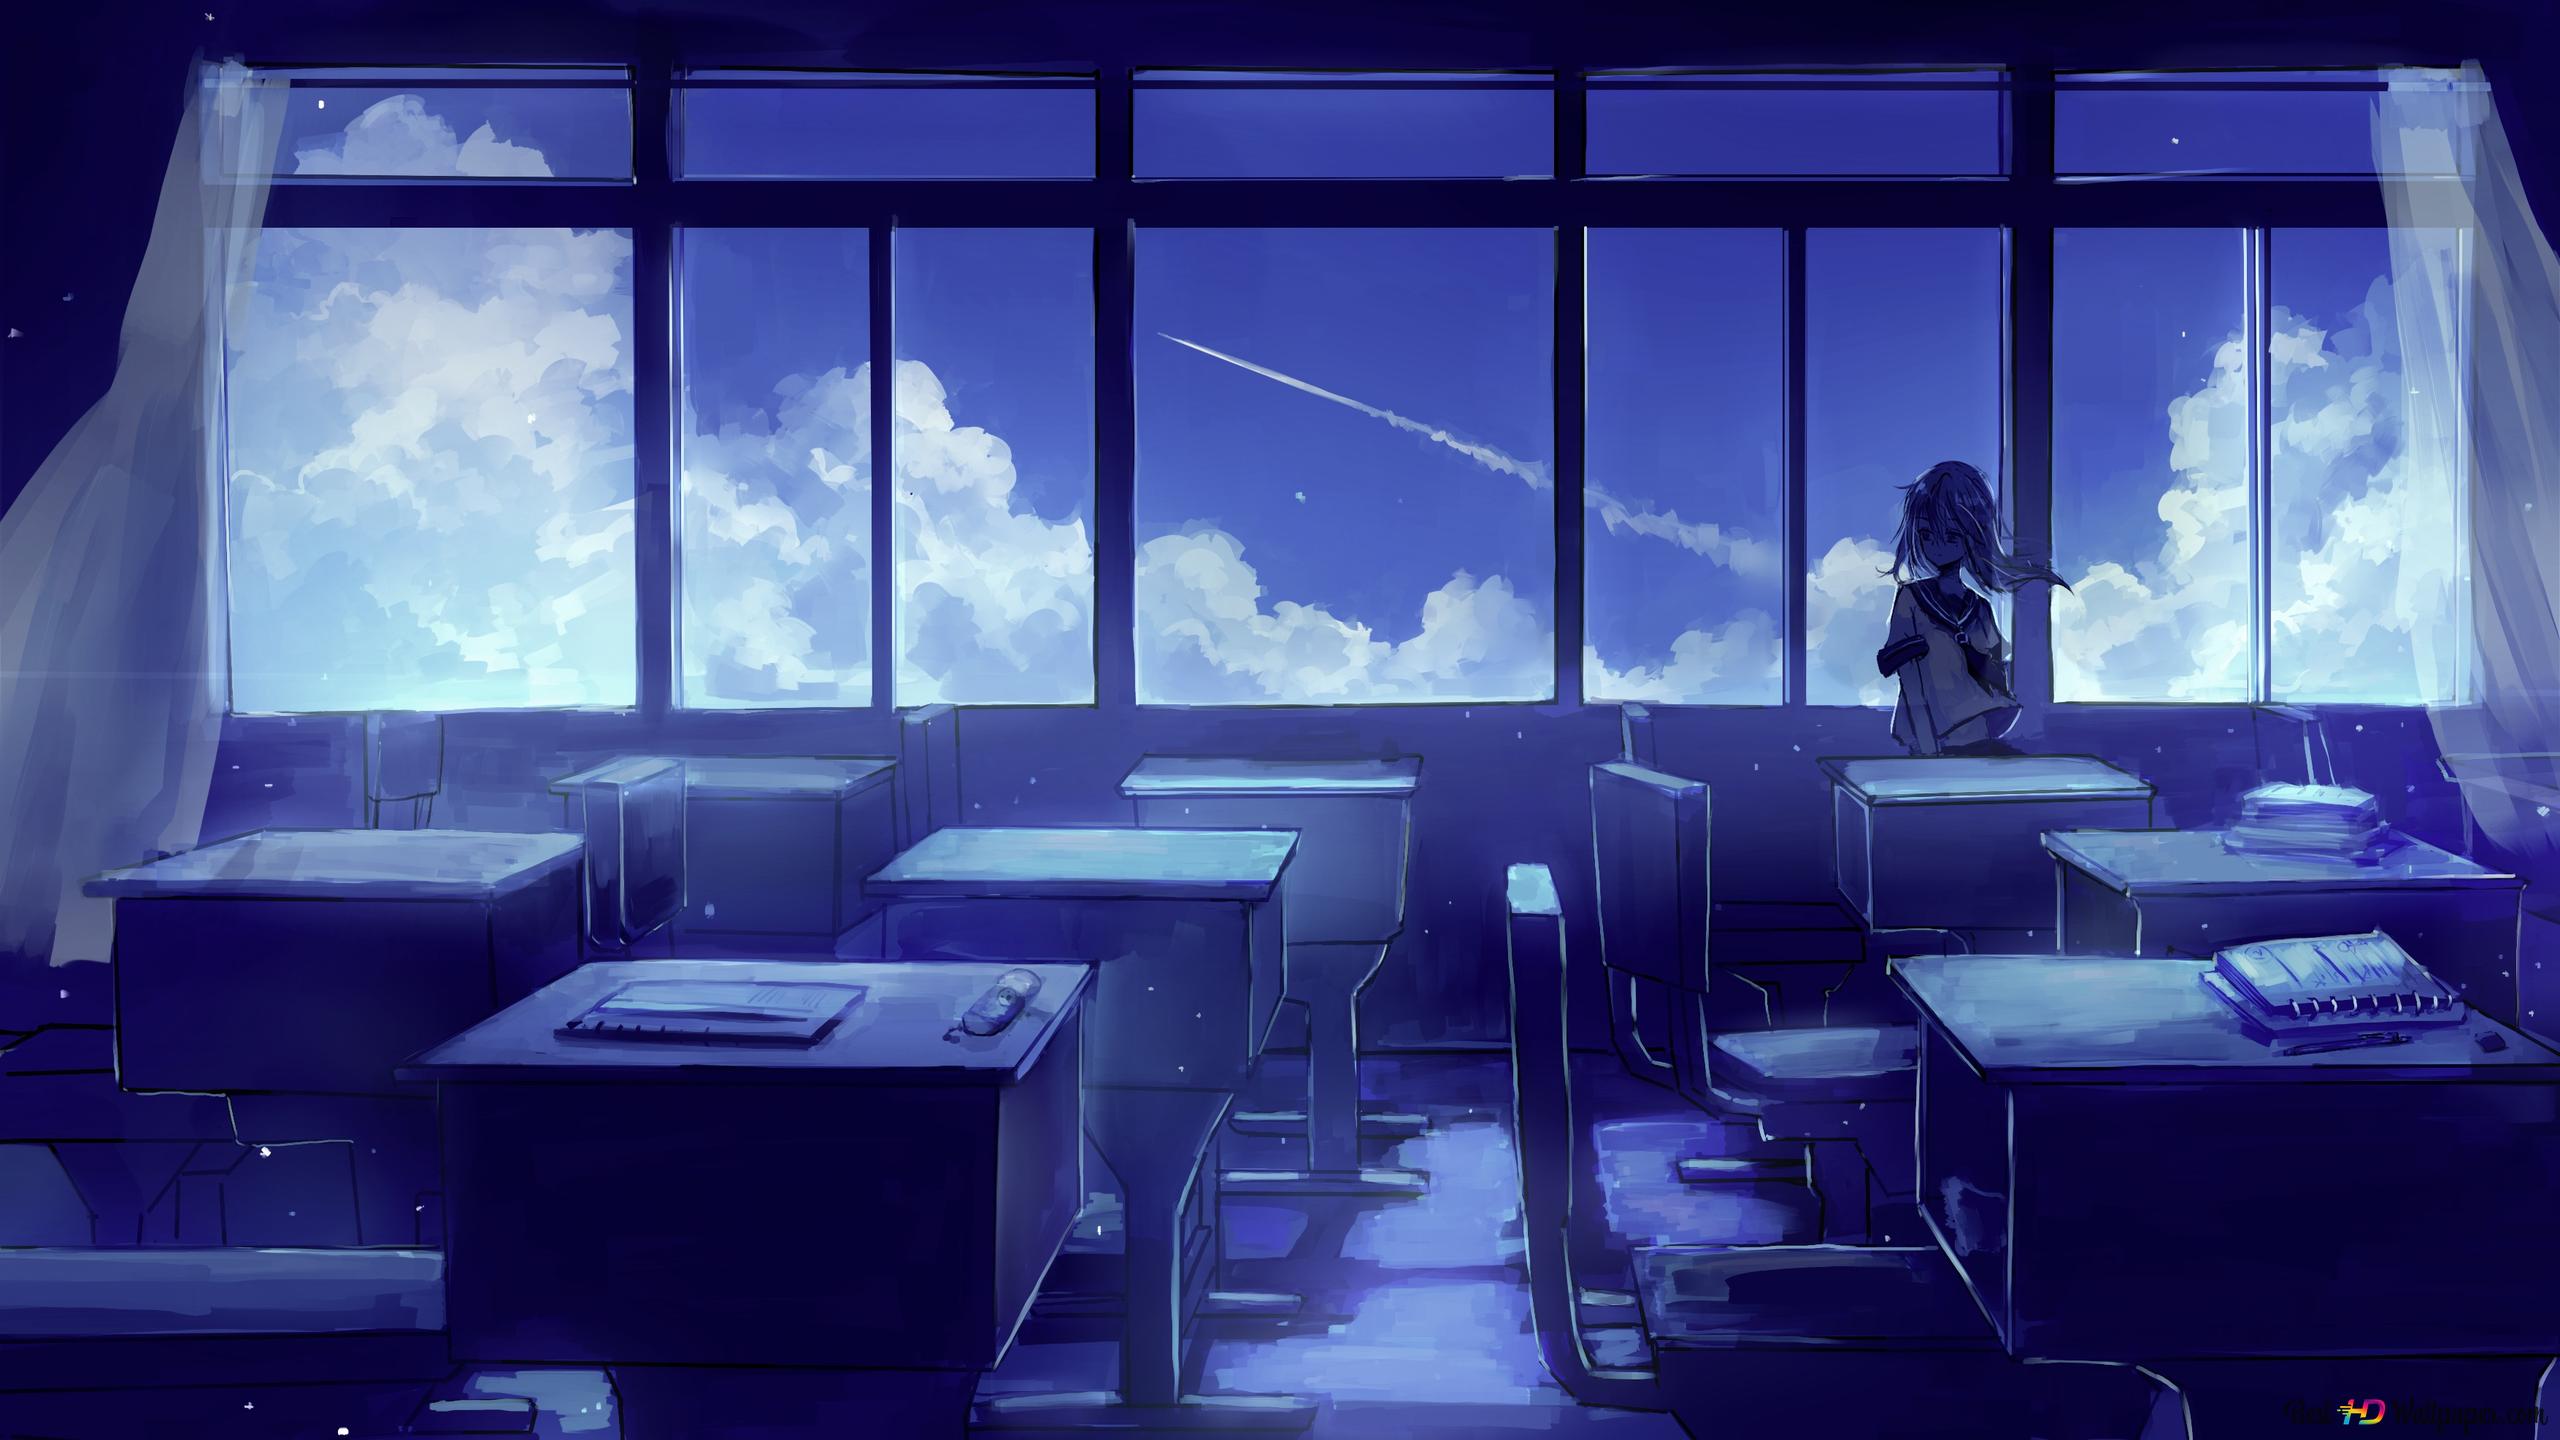 Alone in the classroom k wallpaper download